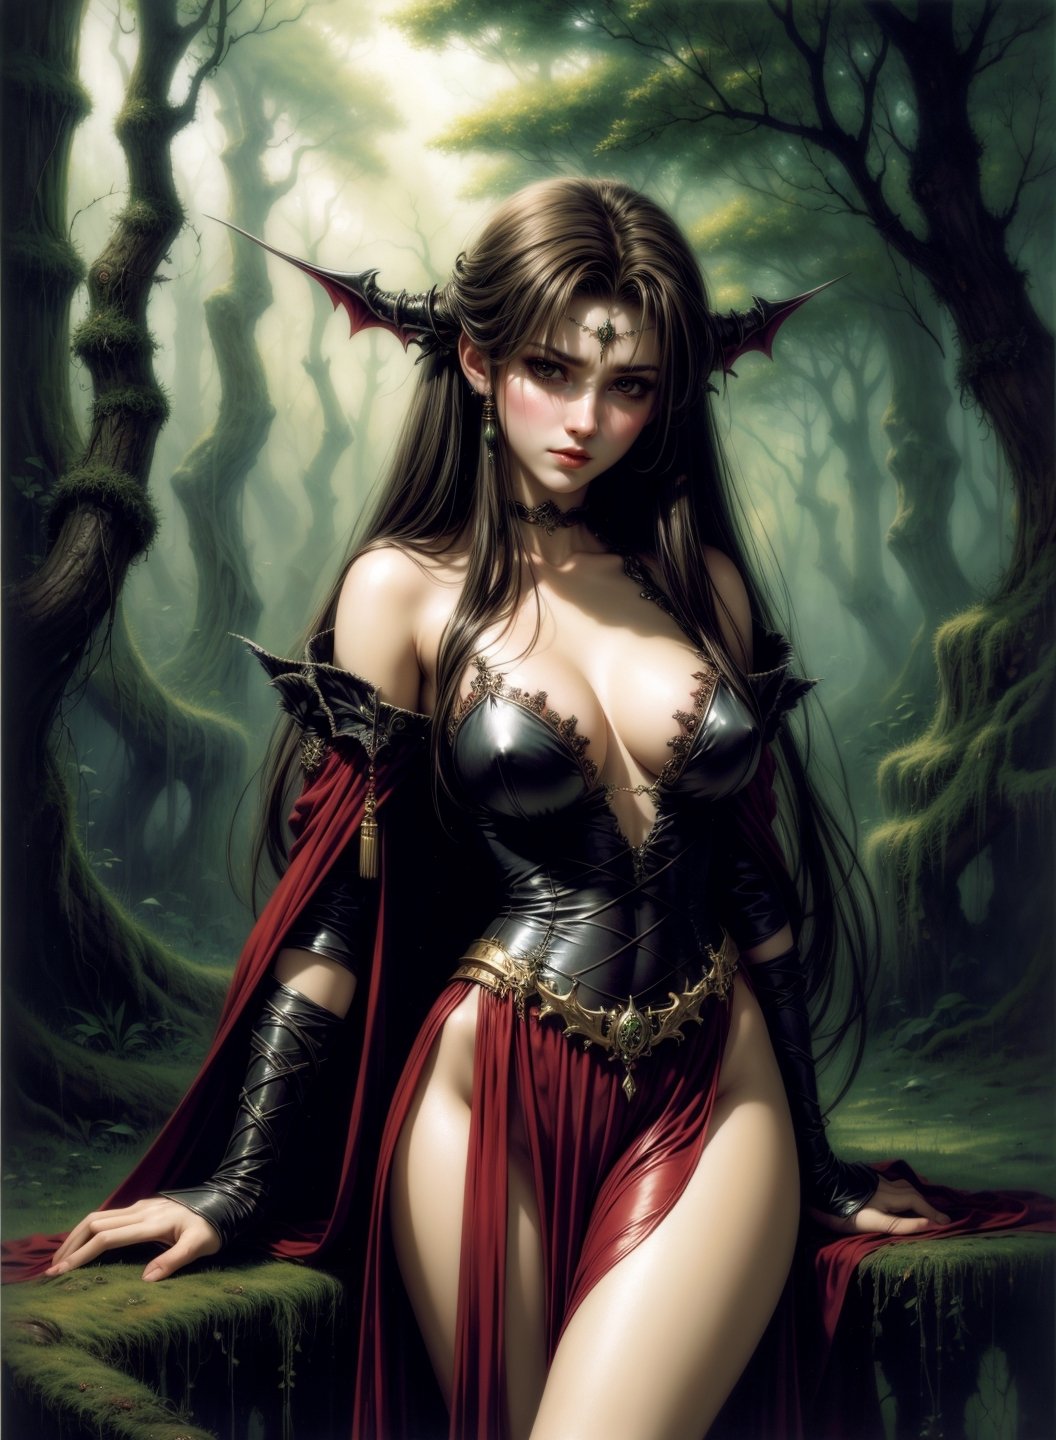 A vampire queen by Luis Royo, languid gaze, greenery forest background 